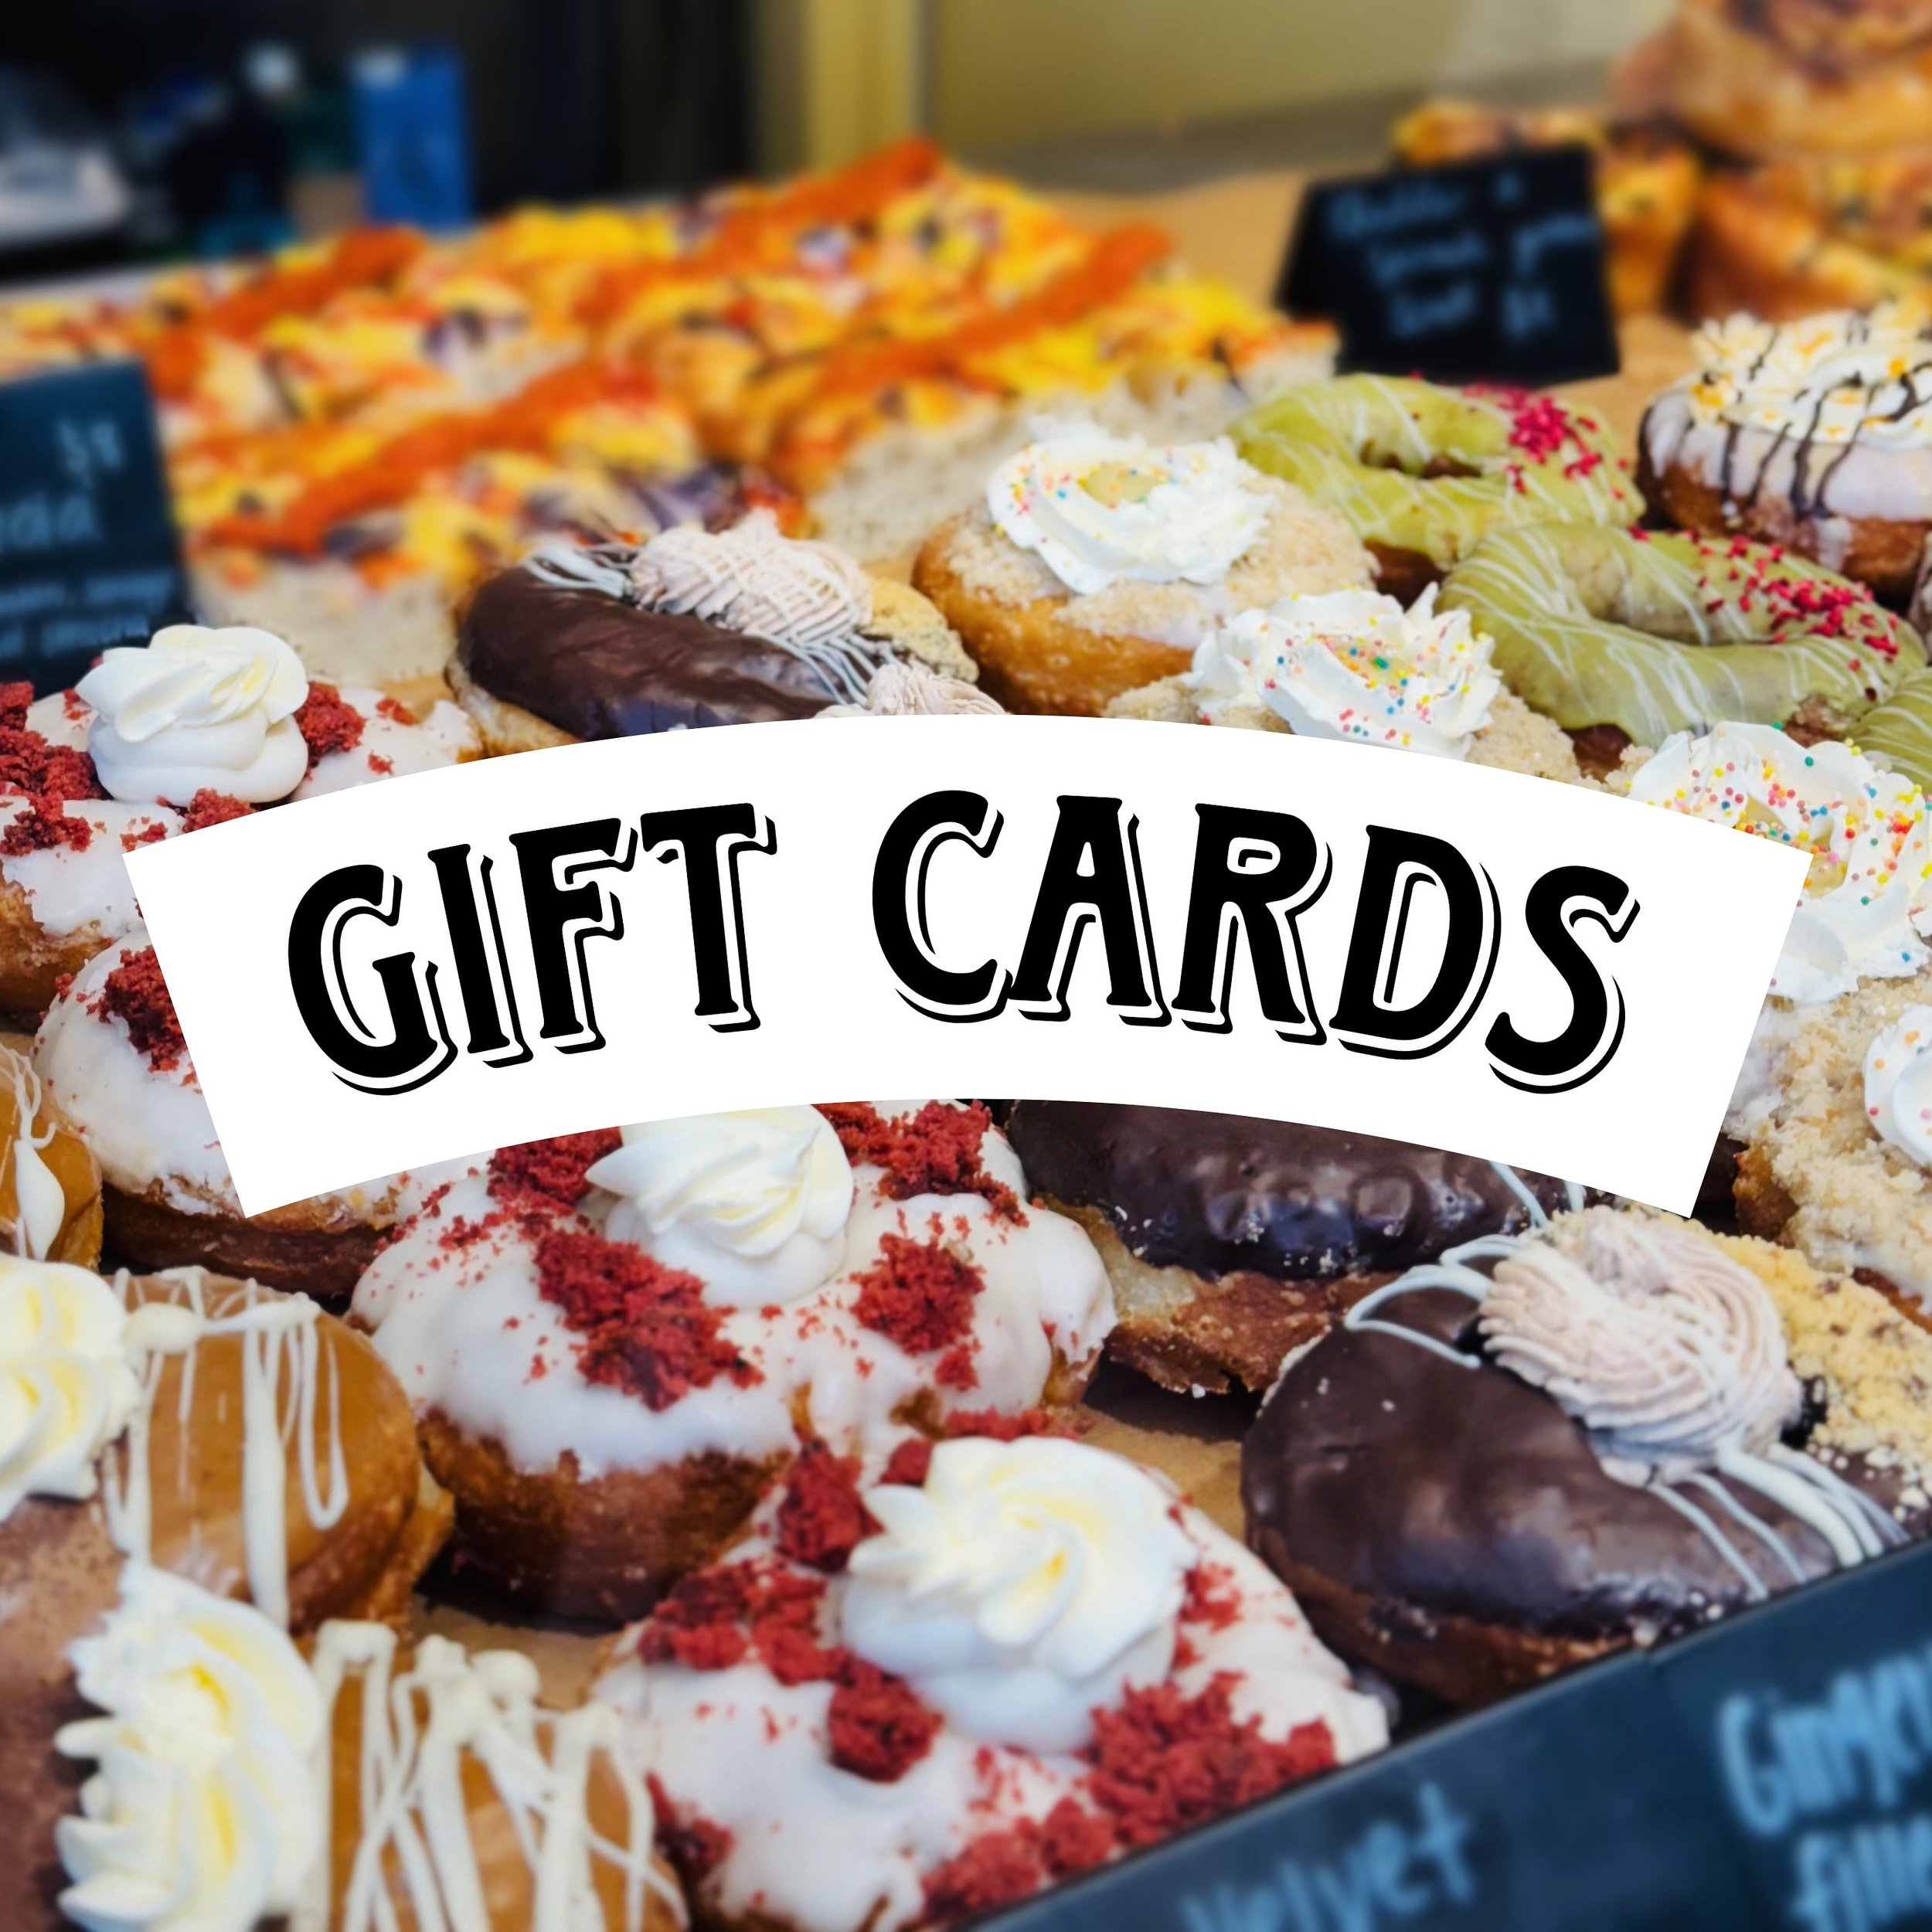 🎁GIFT CARD GIVEAWAY! 🎁
Looking for the perfect prezzy? We have gift cards available to purchase online! Choose to send it instantly or schedule it for a special date. Available now on our website!

To celebrate, we&rsquo;re giving a $50 voucher awa